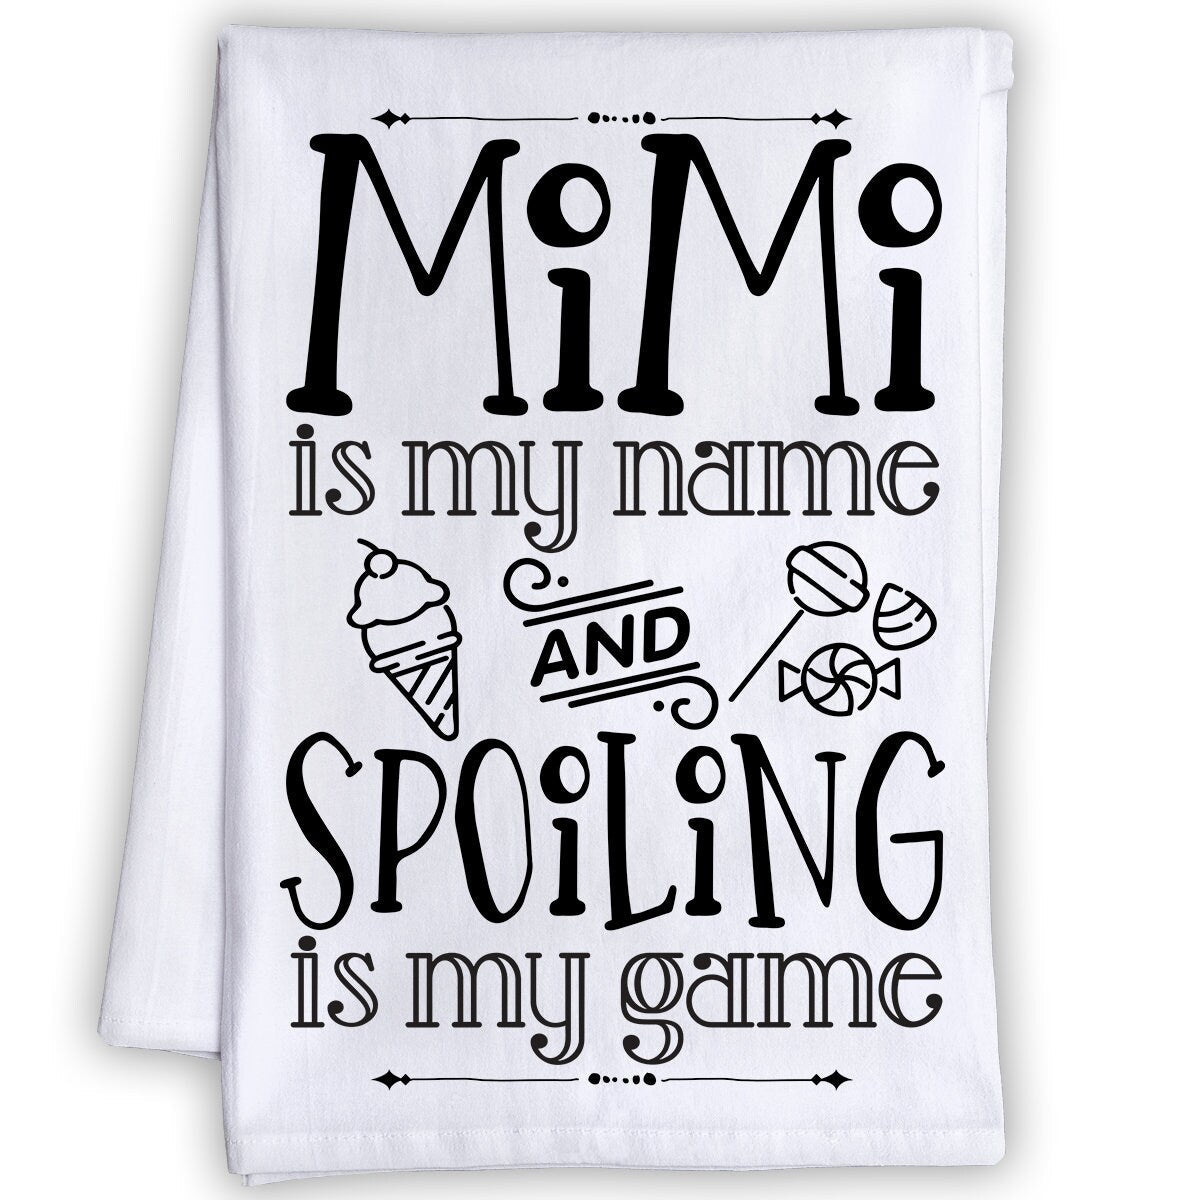 Funny Kitchen Tea Towels - Mimi is My Name and Spoiling is My Game - Humorous Fun Sayings - Cute Housewarming Gift/Fun Home Decor Lone Star Art 